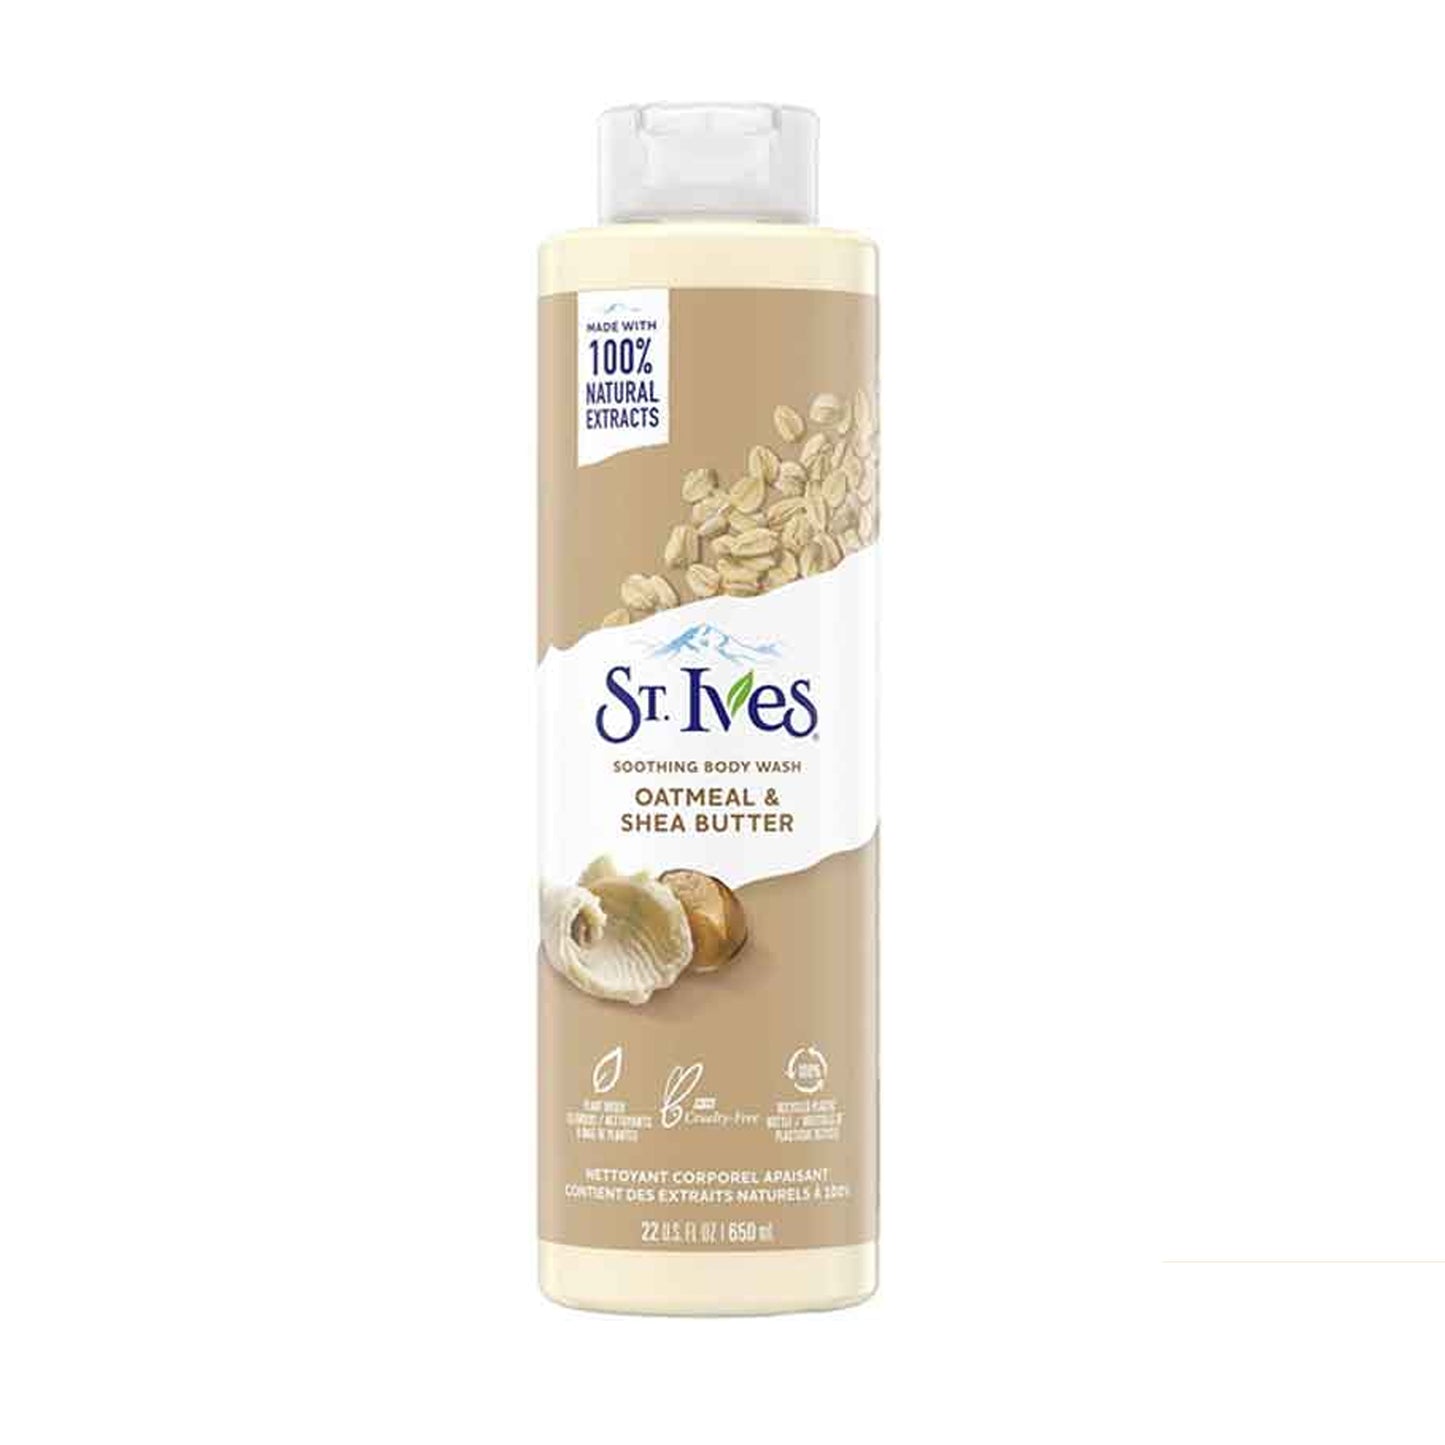 ST. IVES - OATMEAL & SHEA BUTTER SOOTHING BODY WASH - 650ML